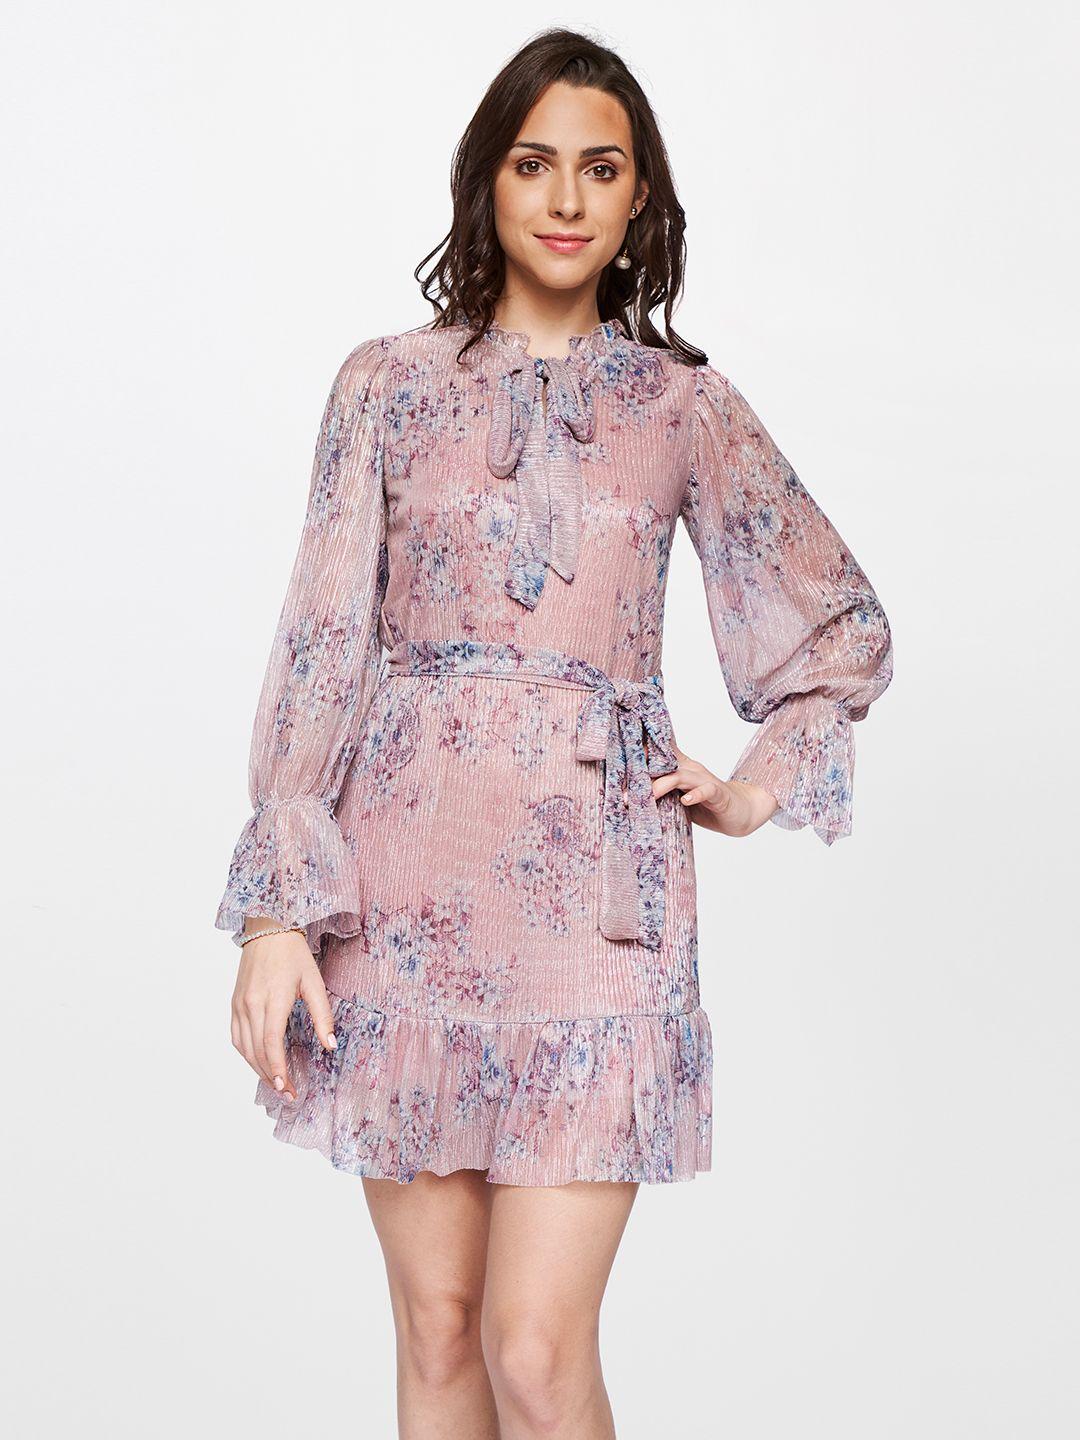 AND Floral Print Tie-Up Neck Bell Sleeve A-Line Dress